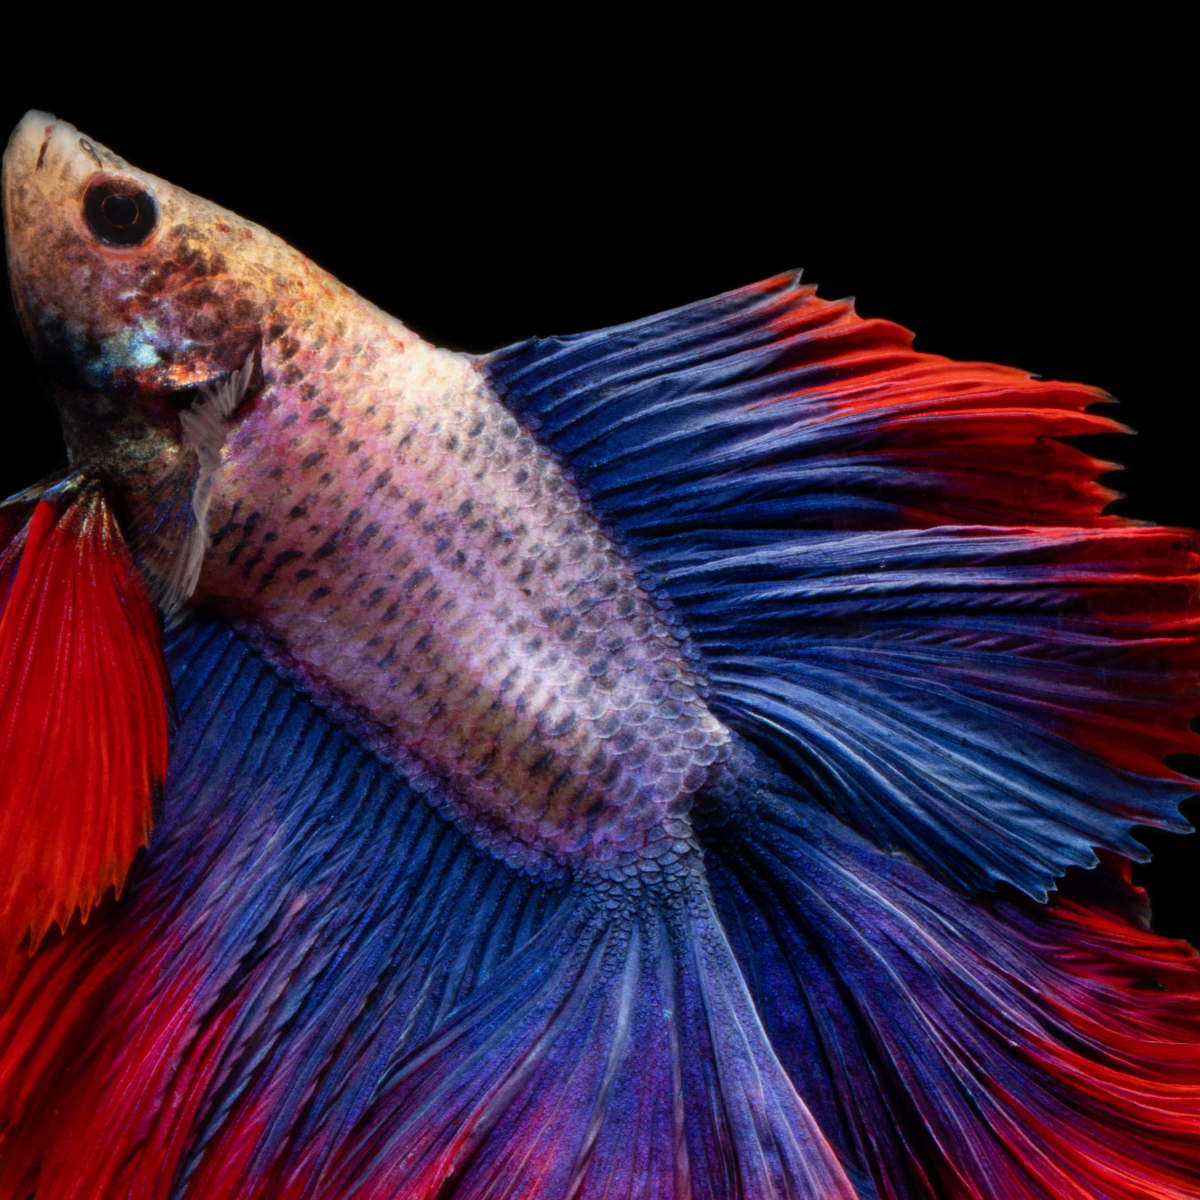 Why You Should Not Keep a Betta Fish in a Bowl - PetHelpful